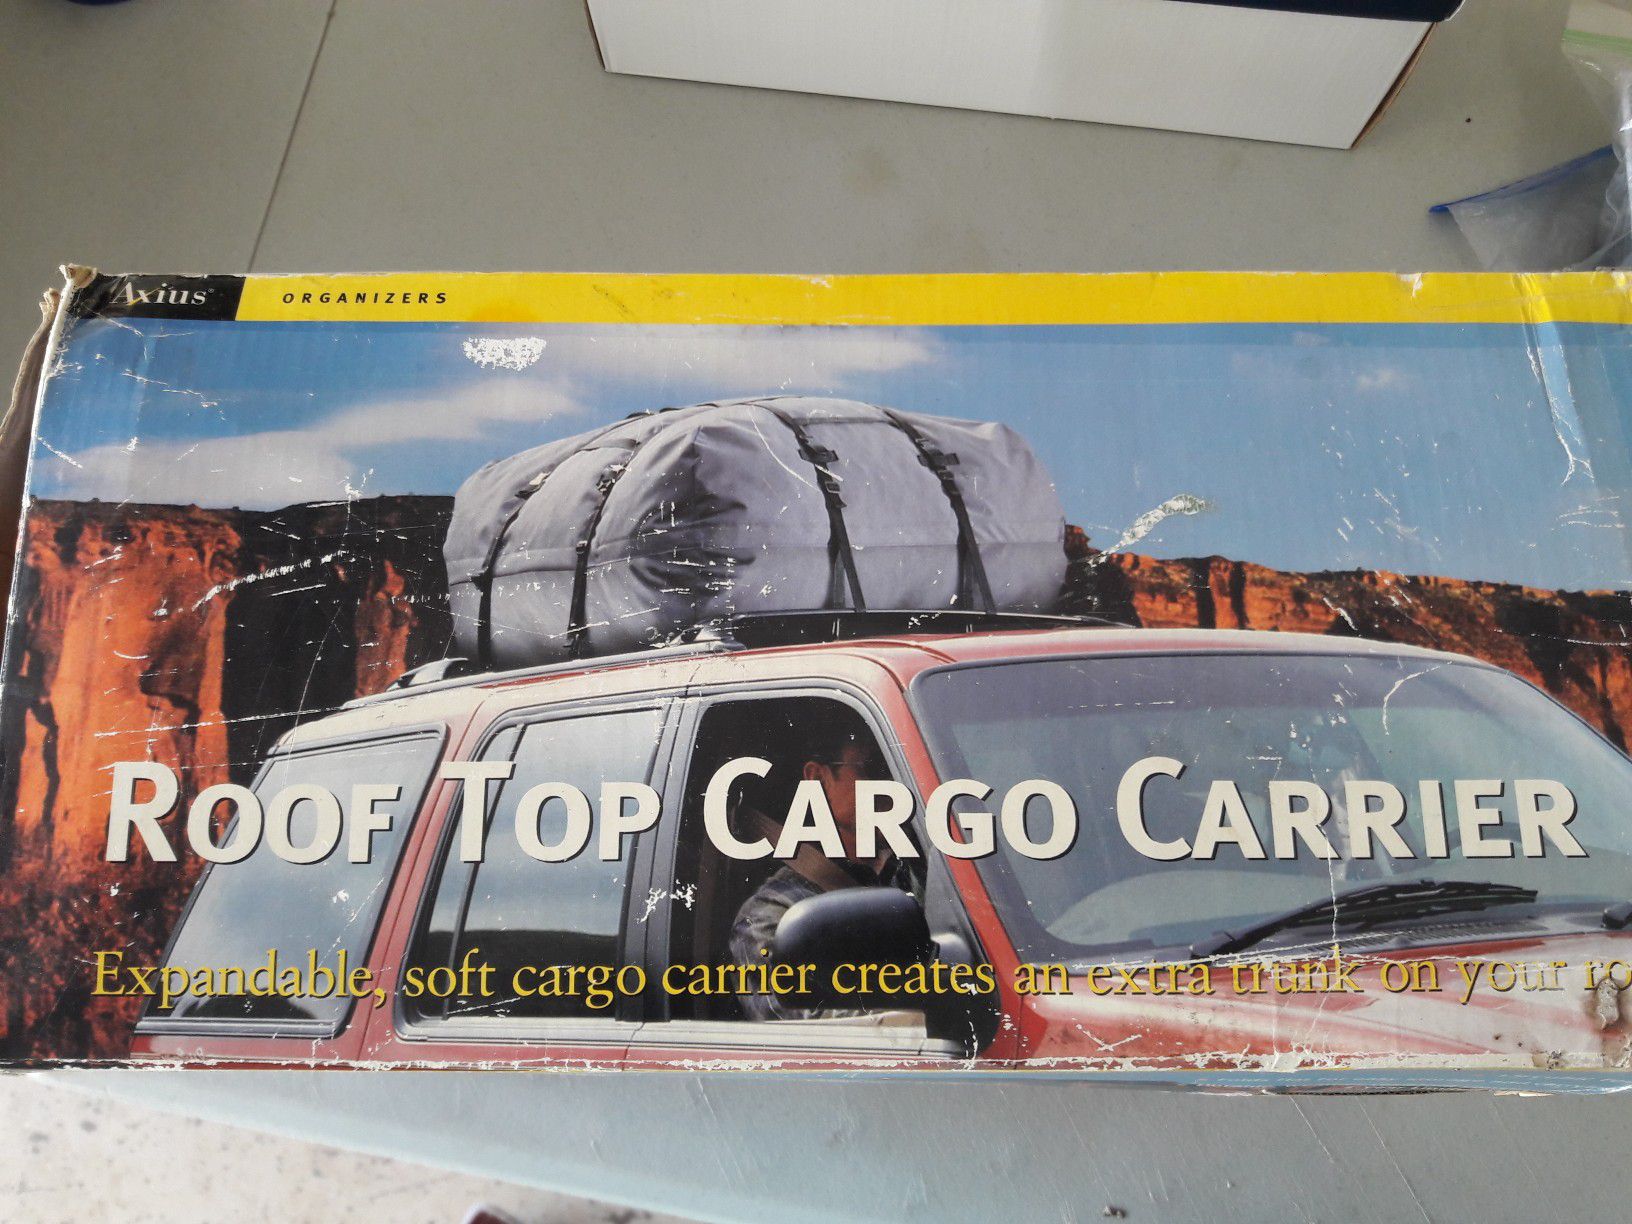 Roof Top Cargo Carrier, Bag, Great condition, $15